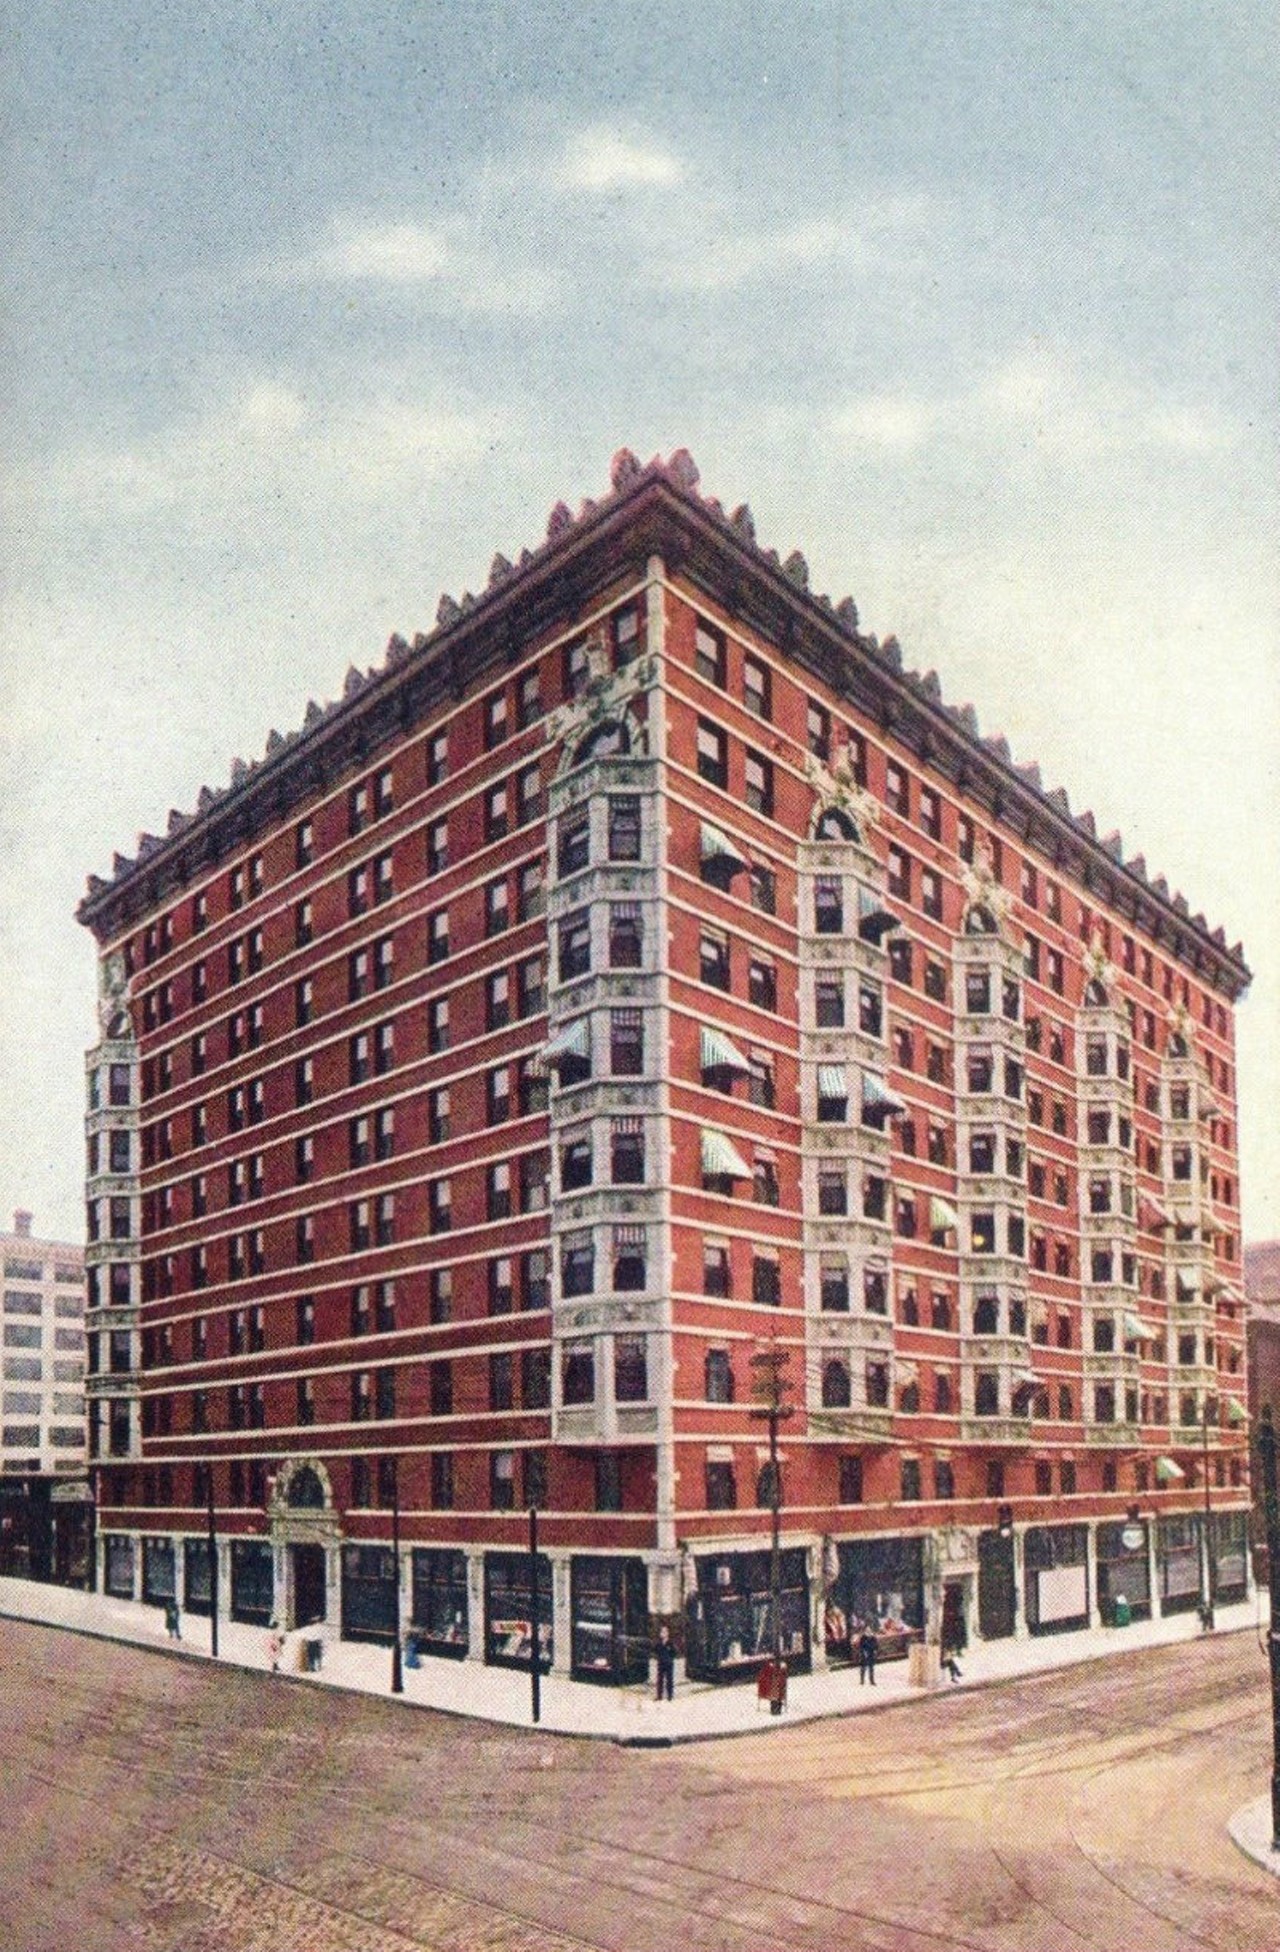 Spend a night at Marquette Hotel.
Later known as the Milner Hotel, the ten-story brick building that once stood at the southeast corner of 18th and Washington opened as the Marquette Hotel in 1907. Built to serve dry goods companies that once thrived on the western edge of downtown St. Louis, the Marquette stood for eighty-one years. Designed by the prominent St. Louis architectural firm Barnett, Haynes, and Barnet, the Marquette stood ten stories tall and featured rich terra cotta ornament designed by noted sculptor George Julian Zolnay. Despite being listed on the National Register of Historic Places, the hotel was torn down in 1988 and replaced with a parking lot.Photo courtesy of Cameron Collins.